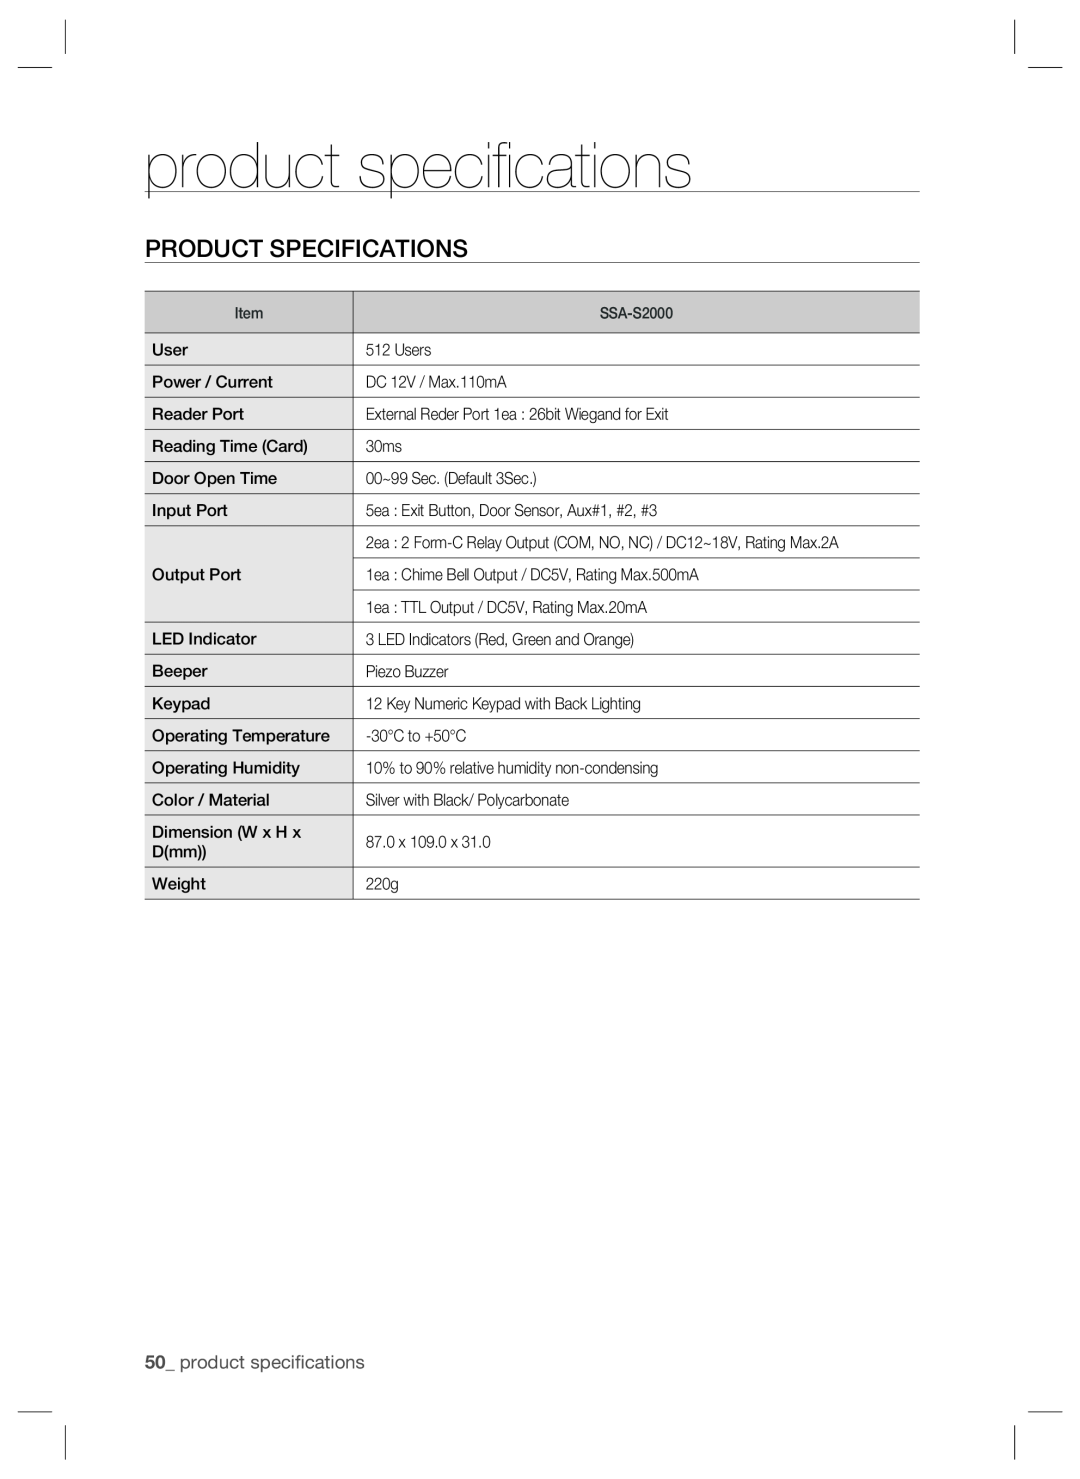 Samsung SSA-S2000W user manual Product Specifications, 50_ product speciﬁcations 